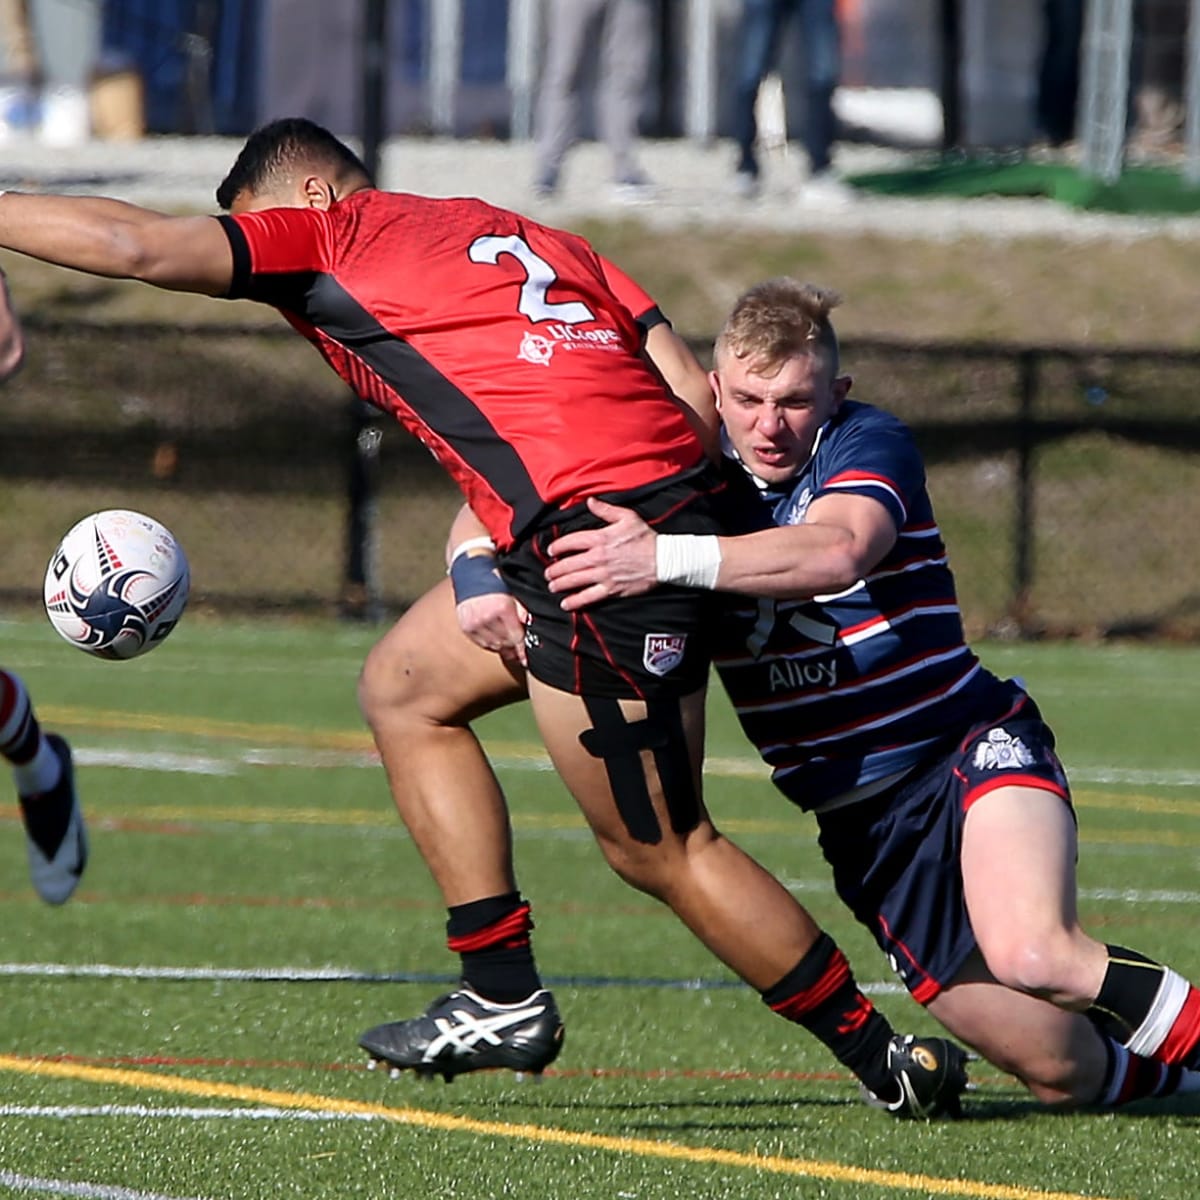 Watch Utah Warriors vs New England Free Jacks Stream rugby live - How to Watch and Stream Major League and College Sports